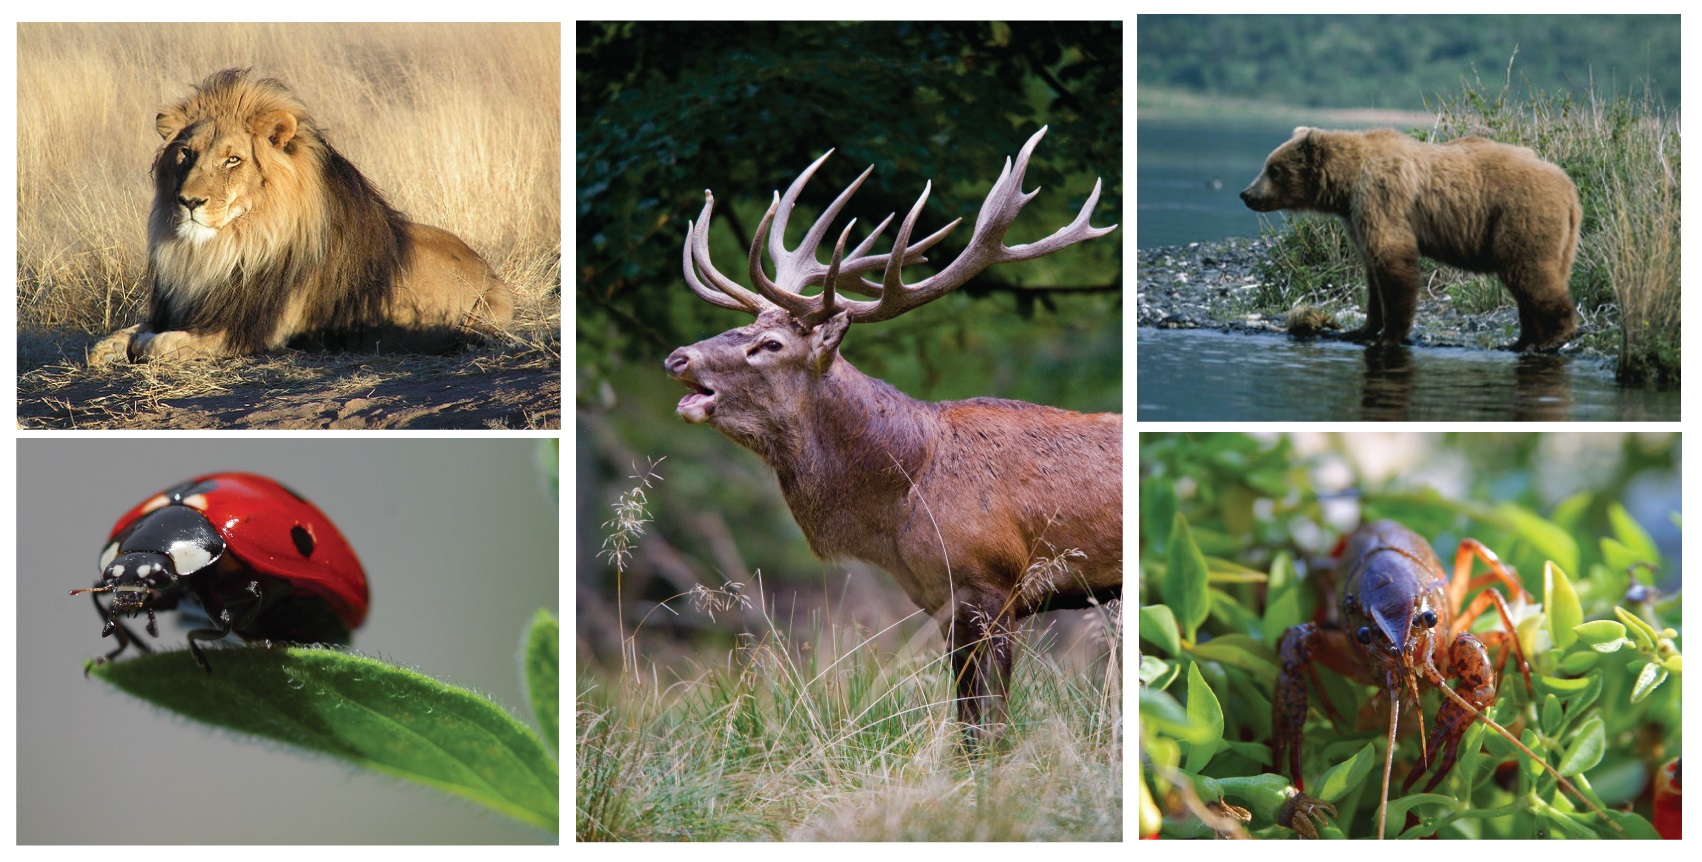 A collage of a lion, ladybug, mule deer, bear, and crayfish